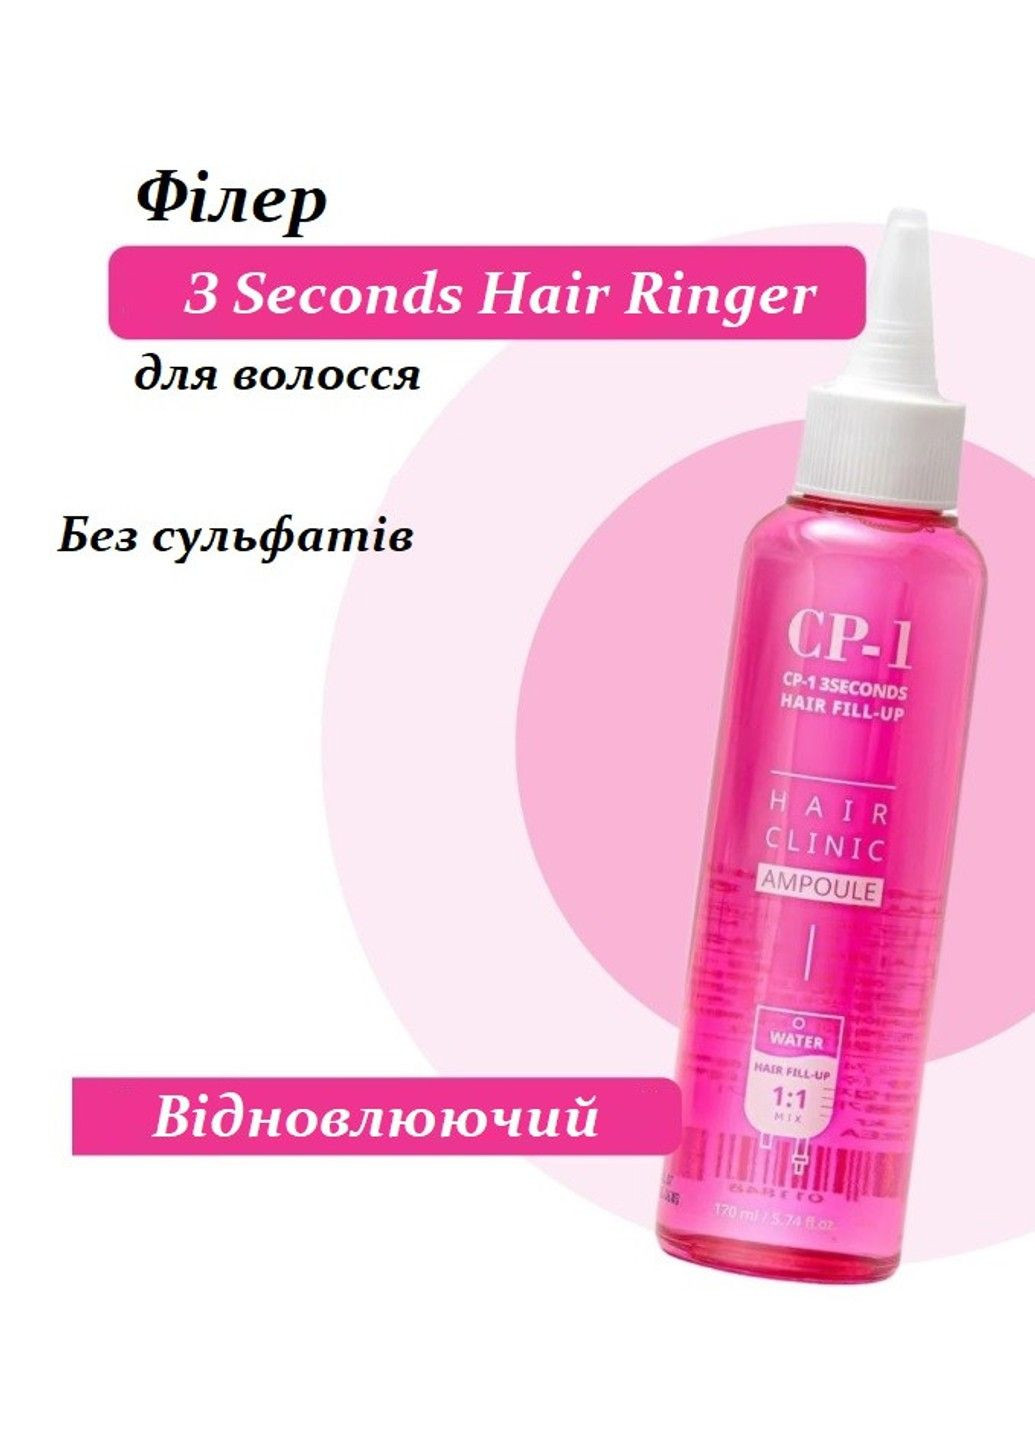 Маска-филлер для волос Esthetic House 3 Seconds Hair Ringer Hair Fill-up Ampoule - 170 мл CP-1 (285813490)